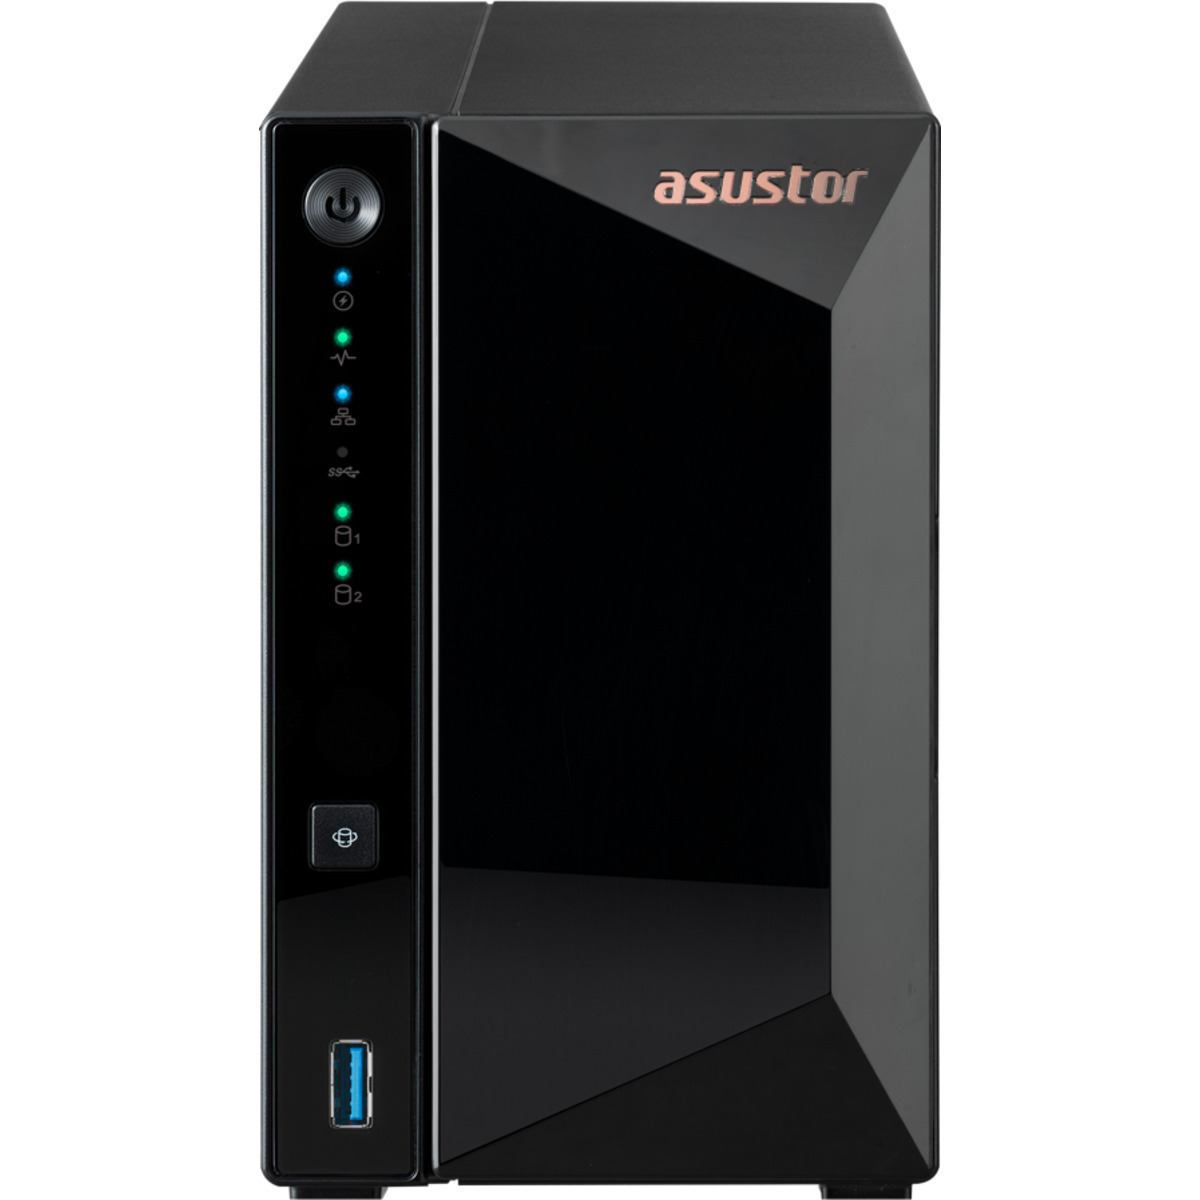 ASUSTOR DRIVESTOR 2 Pro Gen2 AS3302T v2 32tb 2-Bay Desktop Personal / Basic Home / Small Office NAS - Network Attached Storage Device 2x16tb Seagate IronWolf Pro ST16000NT001 3.5 7200rpm SATA 6Gb/s HDD NAS Class Drives Installed - Burn-In Tested - ON SALE DRIVESTOR 2 Pro Gen2 AS3302T v2